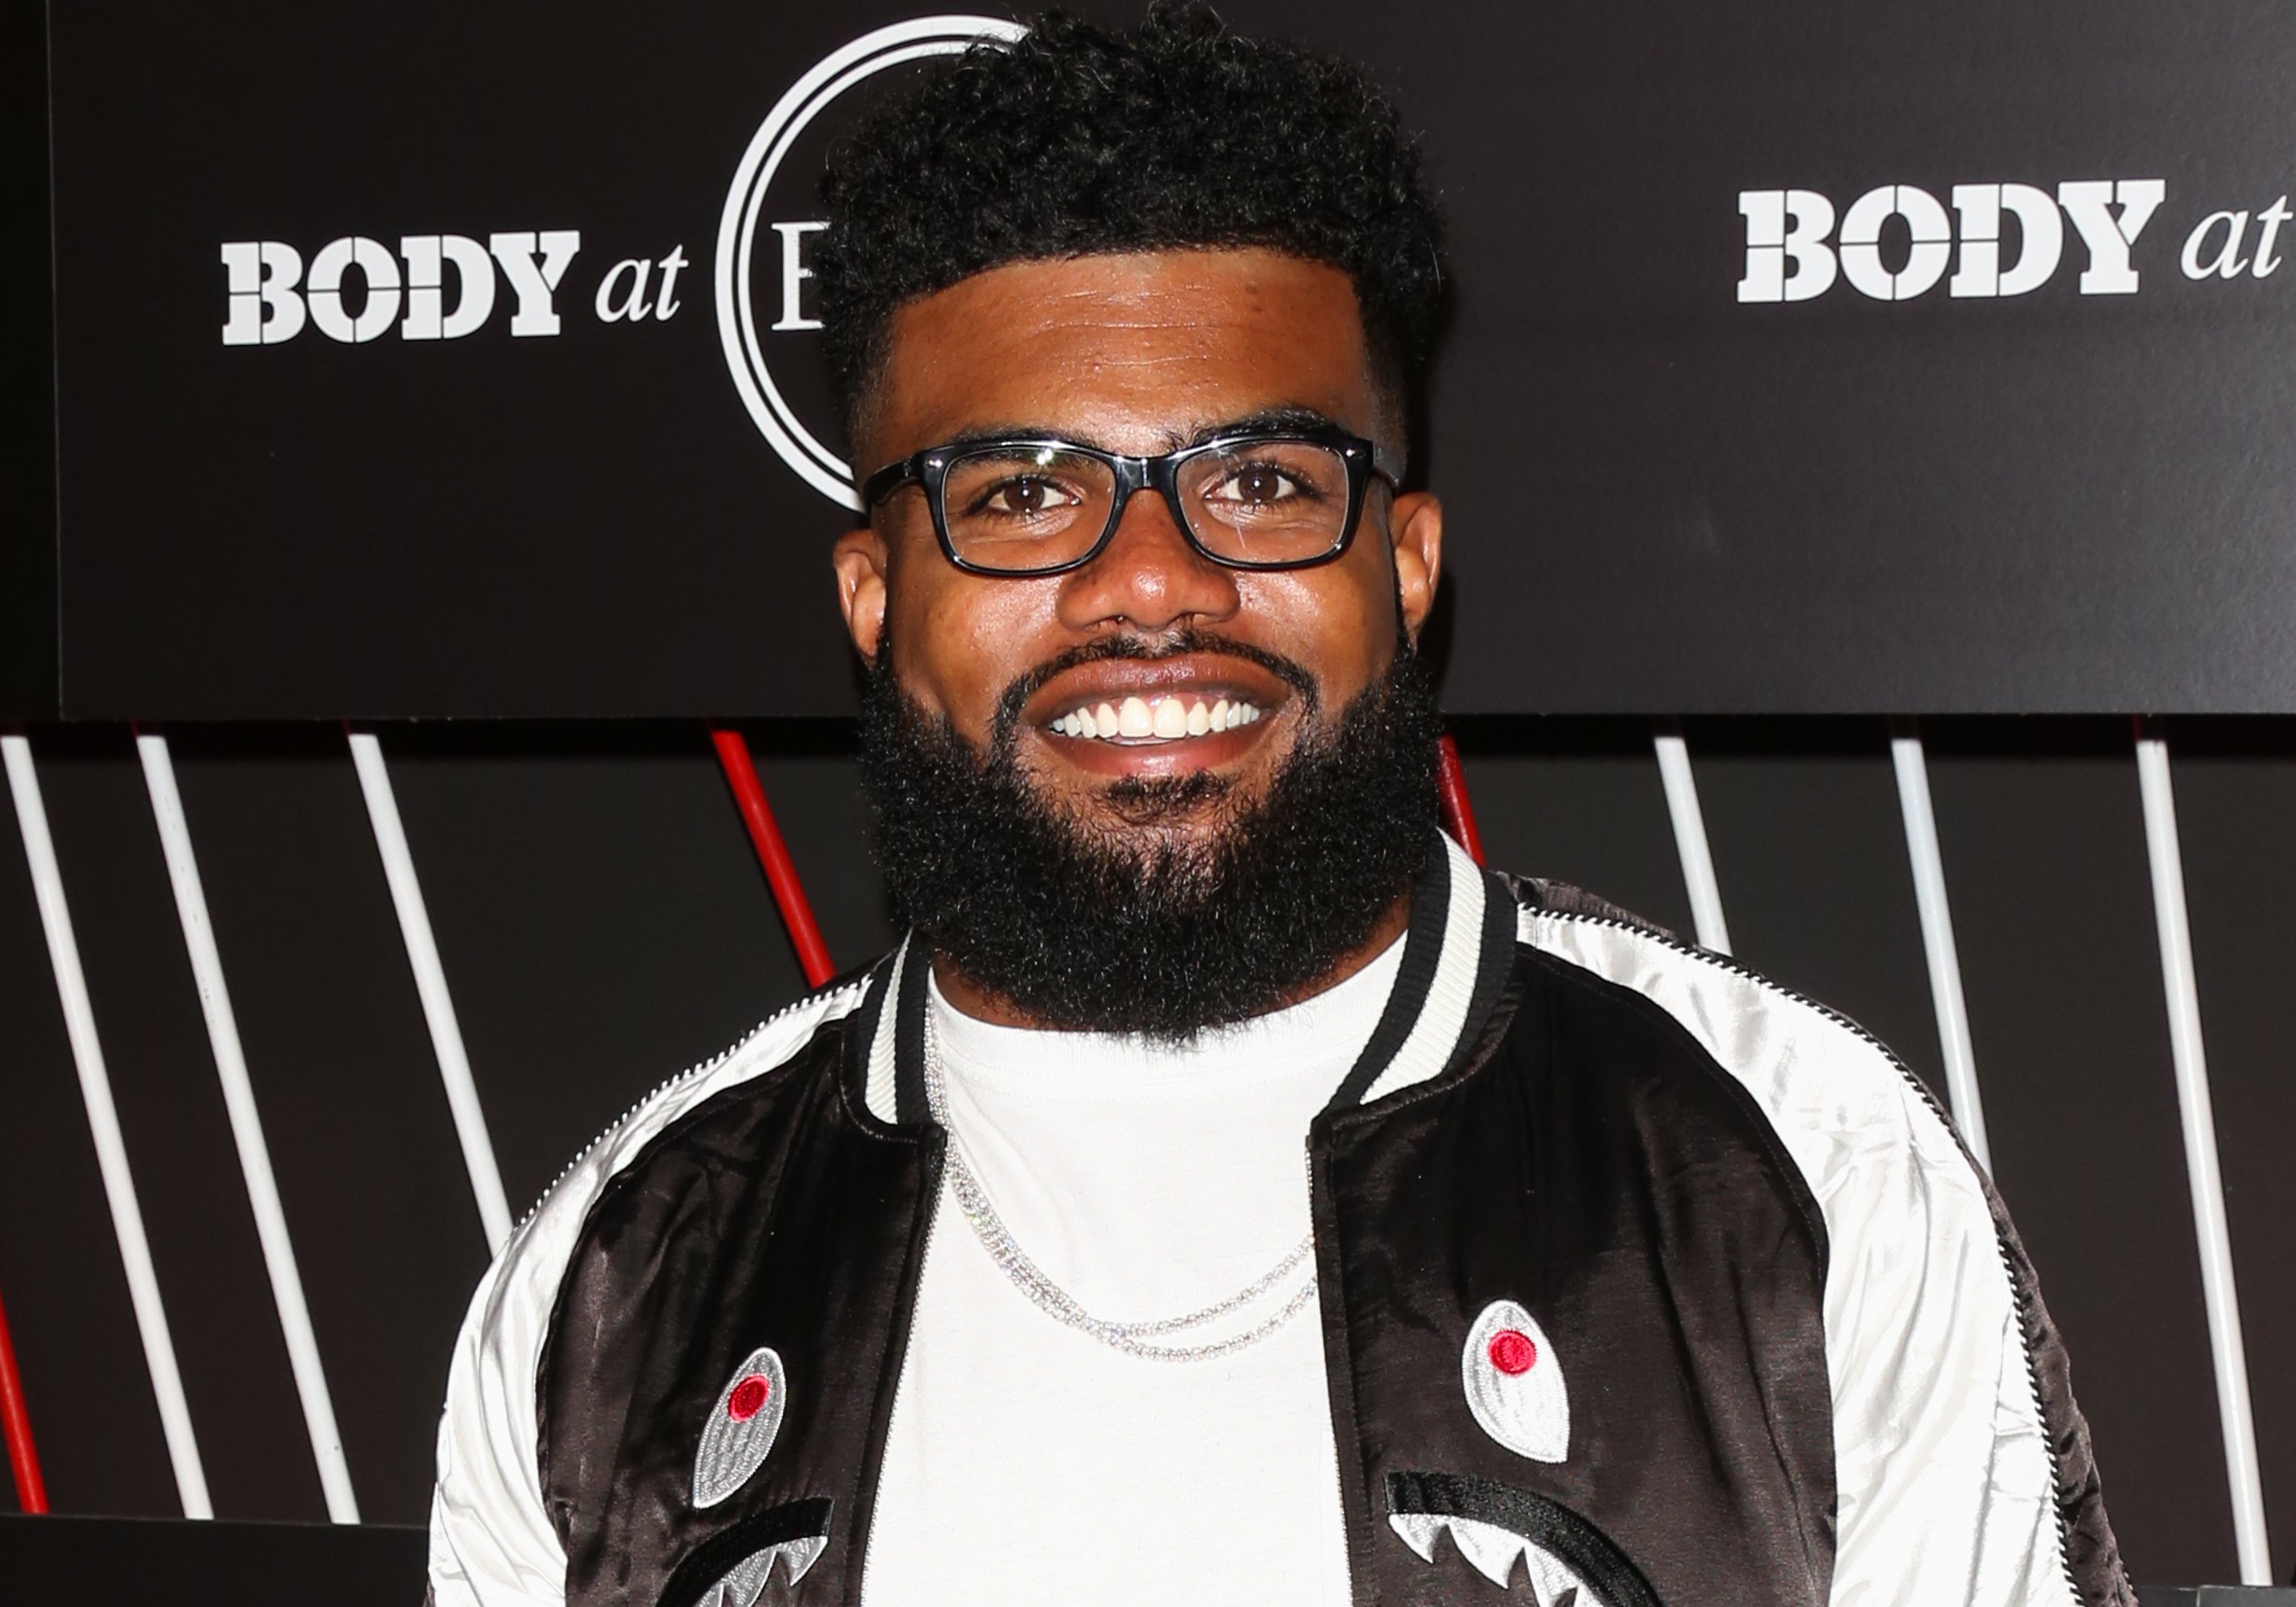 Ezekiel Elliott at the ESPN Magazin Body Issue pre-ESPYS party in Los Angeles, on July 11, 2017 | Source: Getty Images